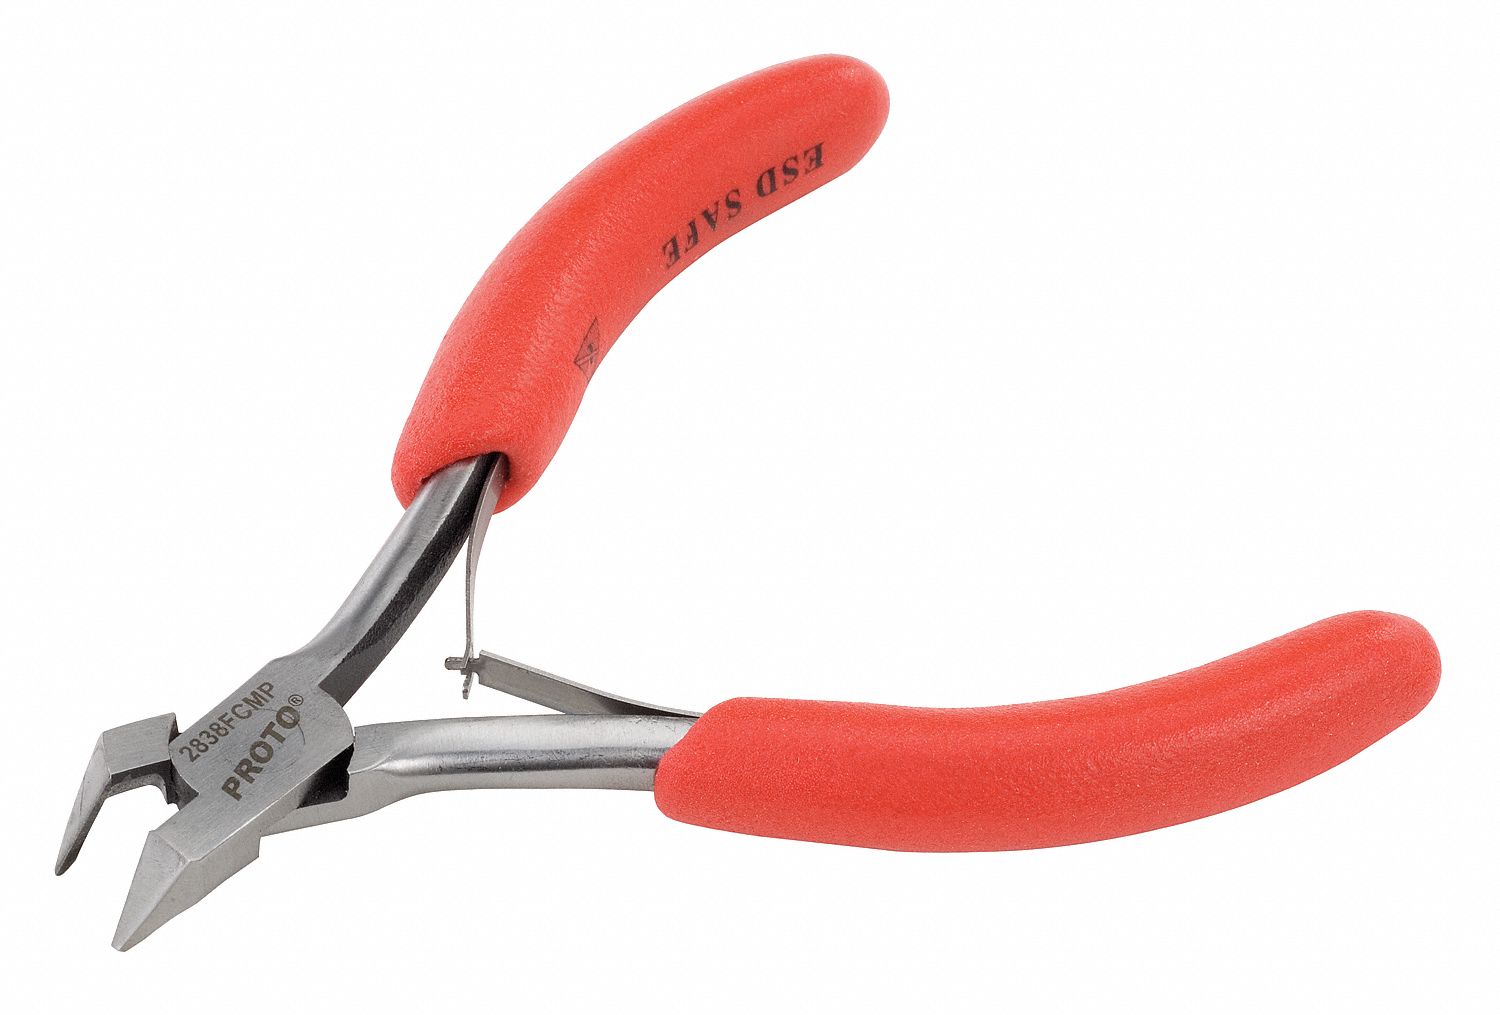 4.5" Side Cutter Diagonal Wire Cutting Pliers Nippers Repair Tool Red L6 